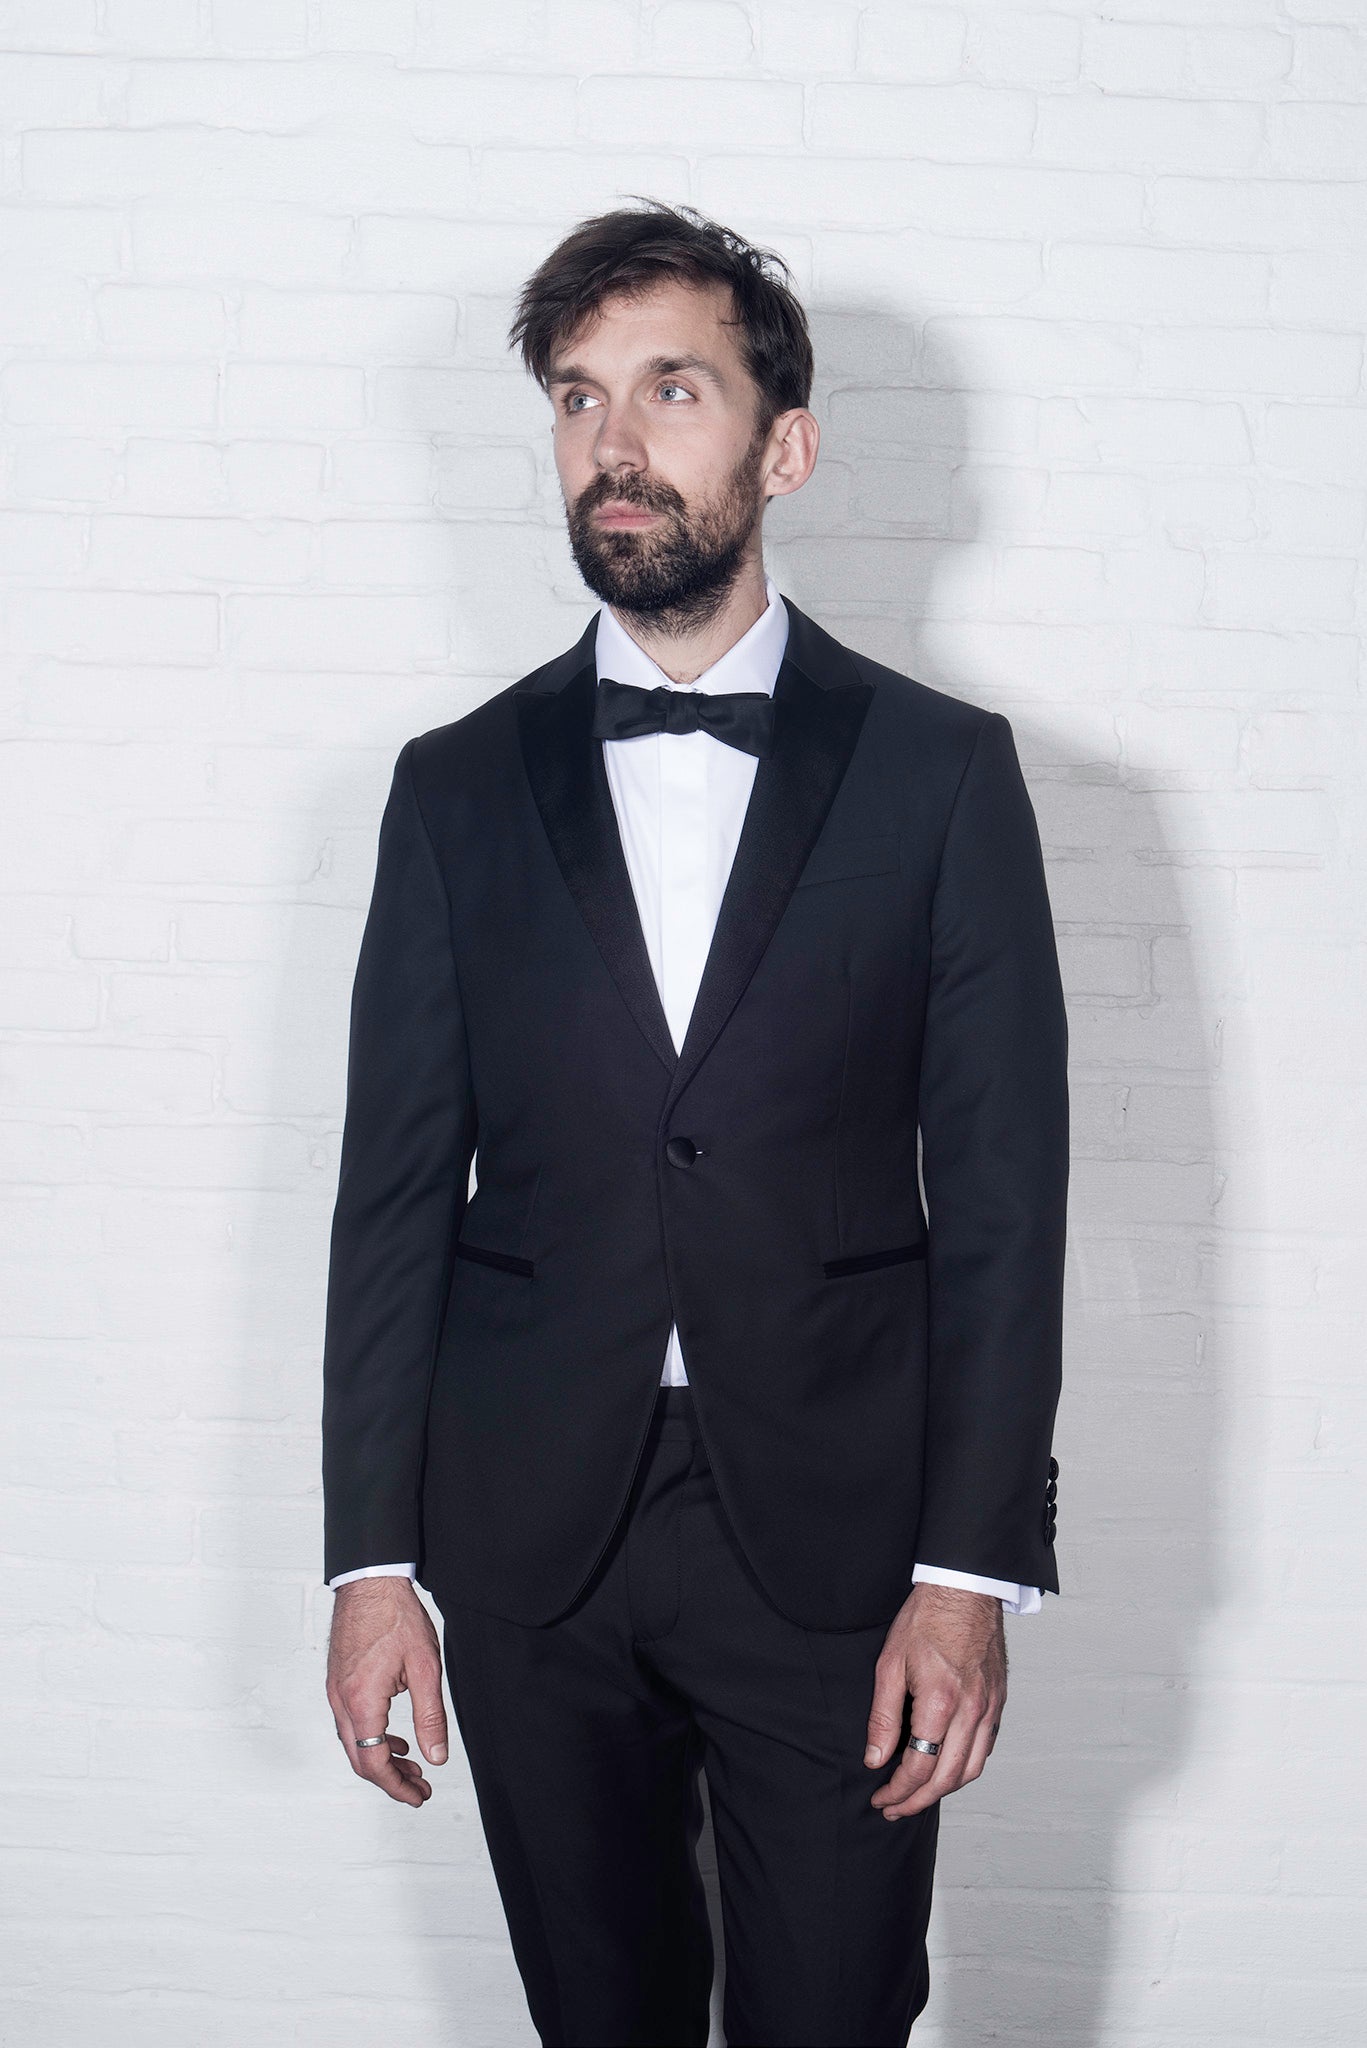 Brooklyn Tailors BKT50 Peak Lapel Tuxedo Jacket in Super 110s - Black with Satin Lapel on-body shot.  Model is wearing the jacket with matching pants